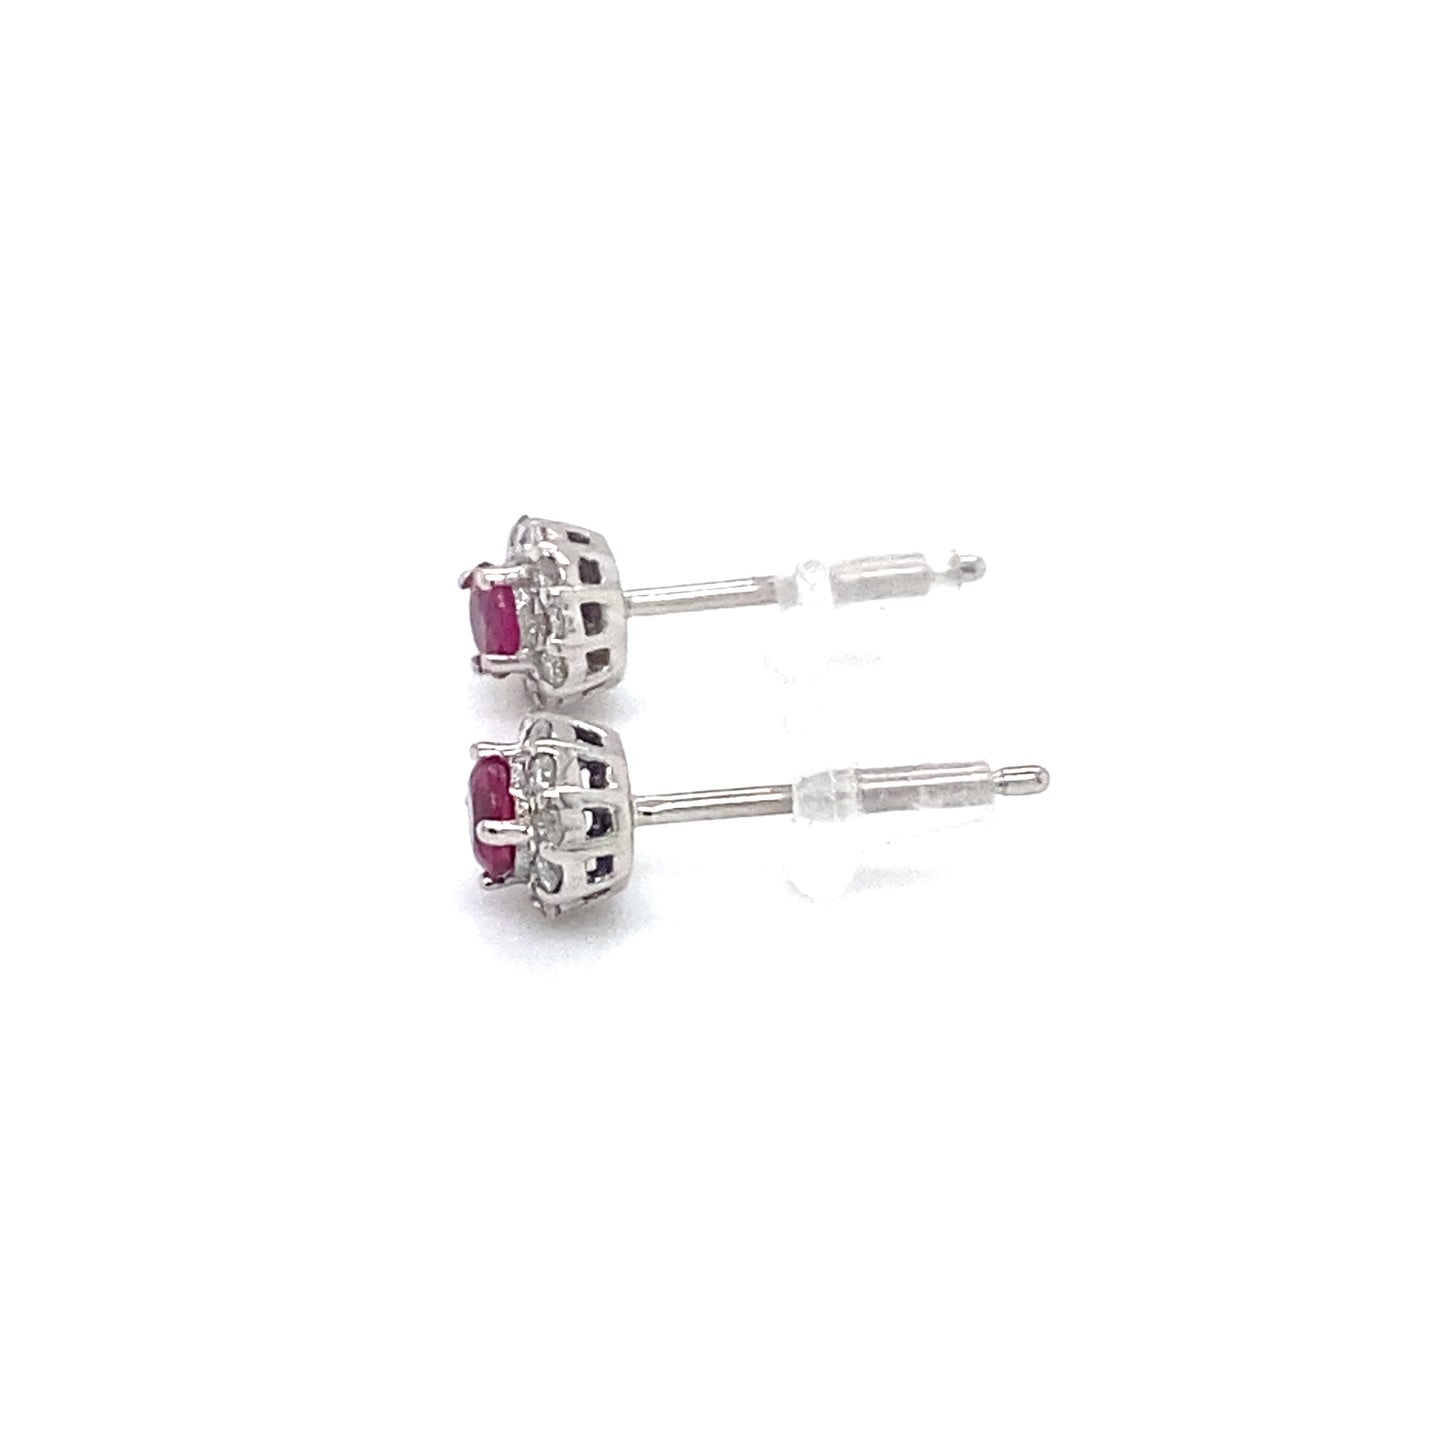 Circa 1990s 0.18ctw Ruby and Diamond Stud Earrings in Platinum